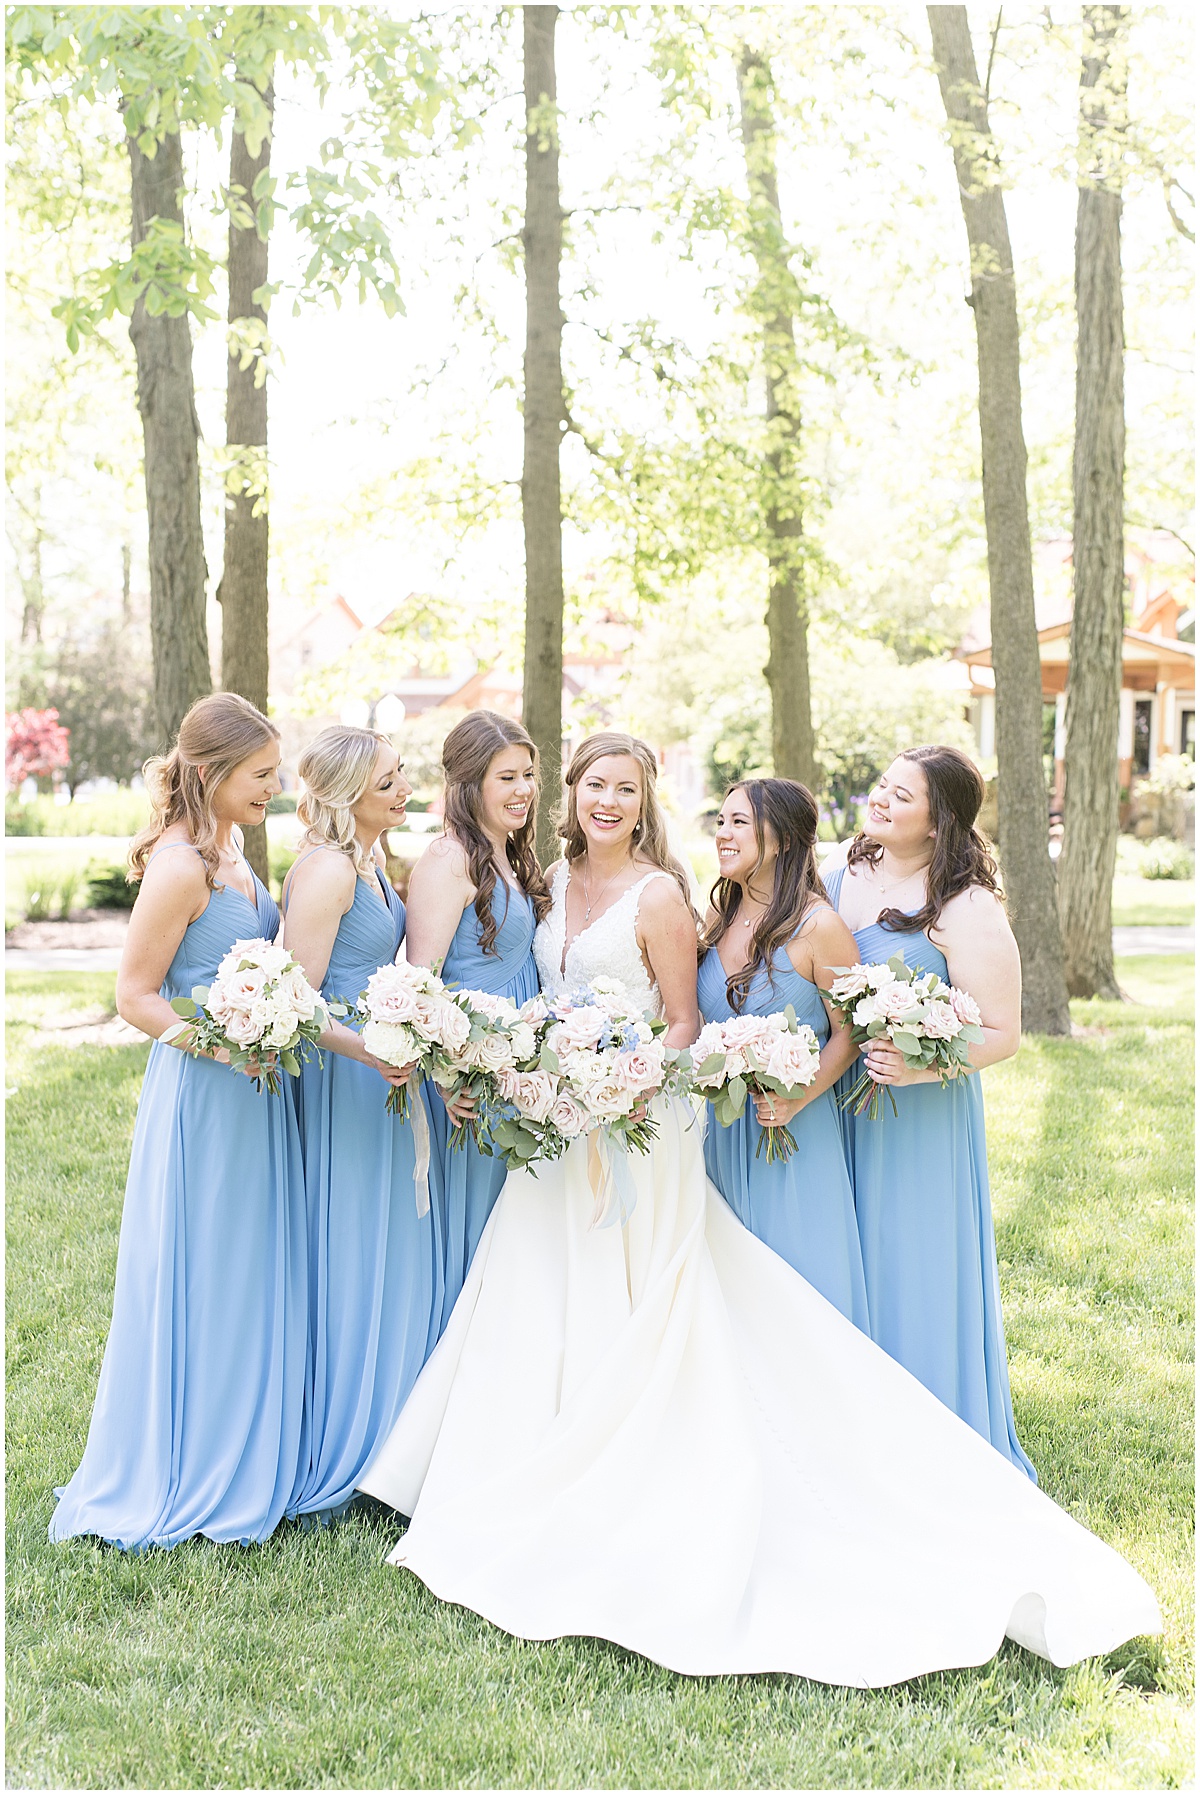 Bridal party photos at Lizton Lodge wedding in Lizton, Indiana photographed by Lafayette, Indiana wedding photographer Victoria Rayburn Photography